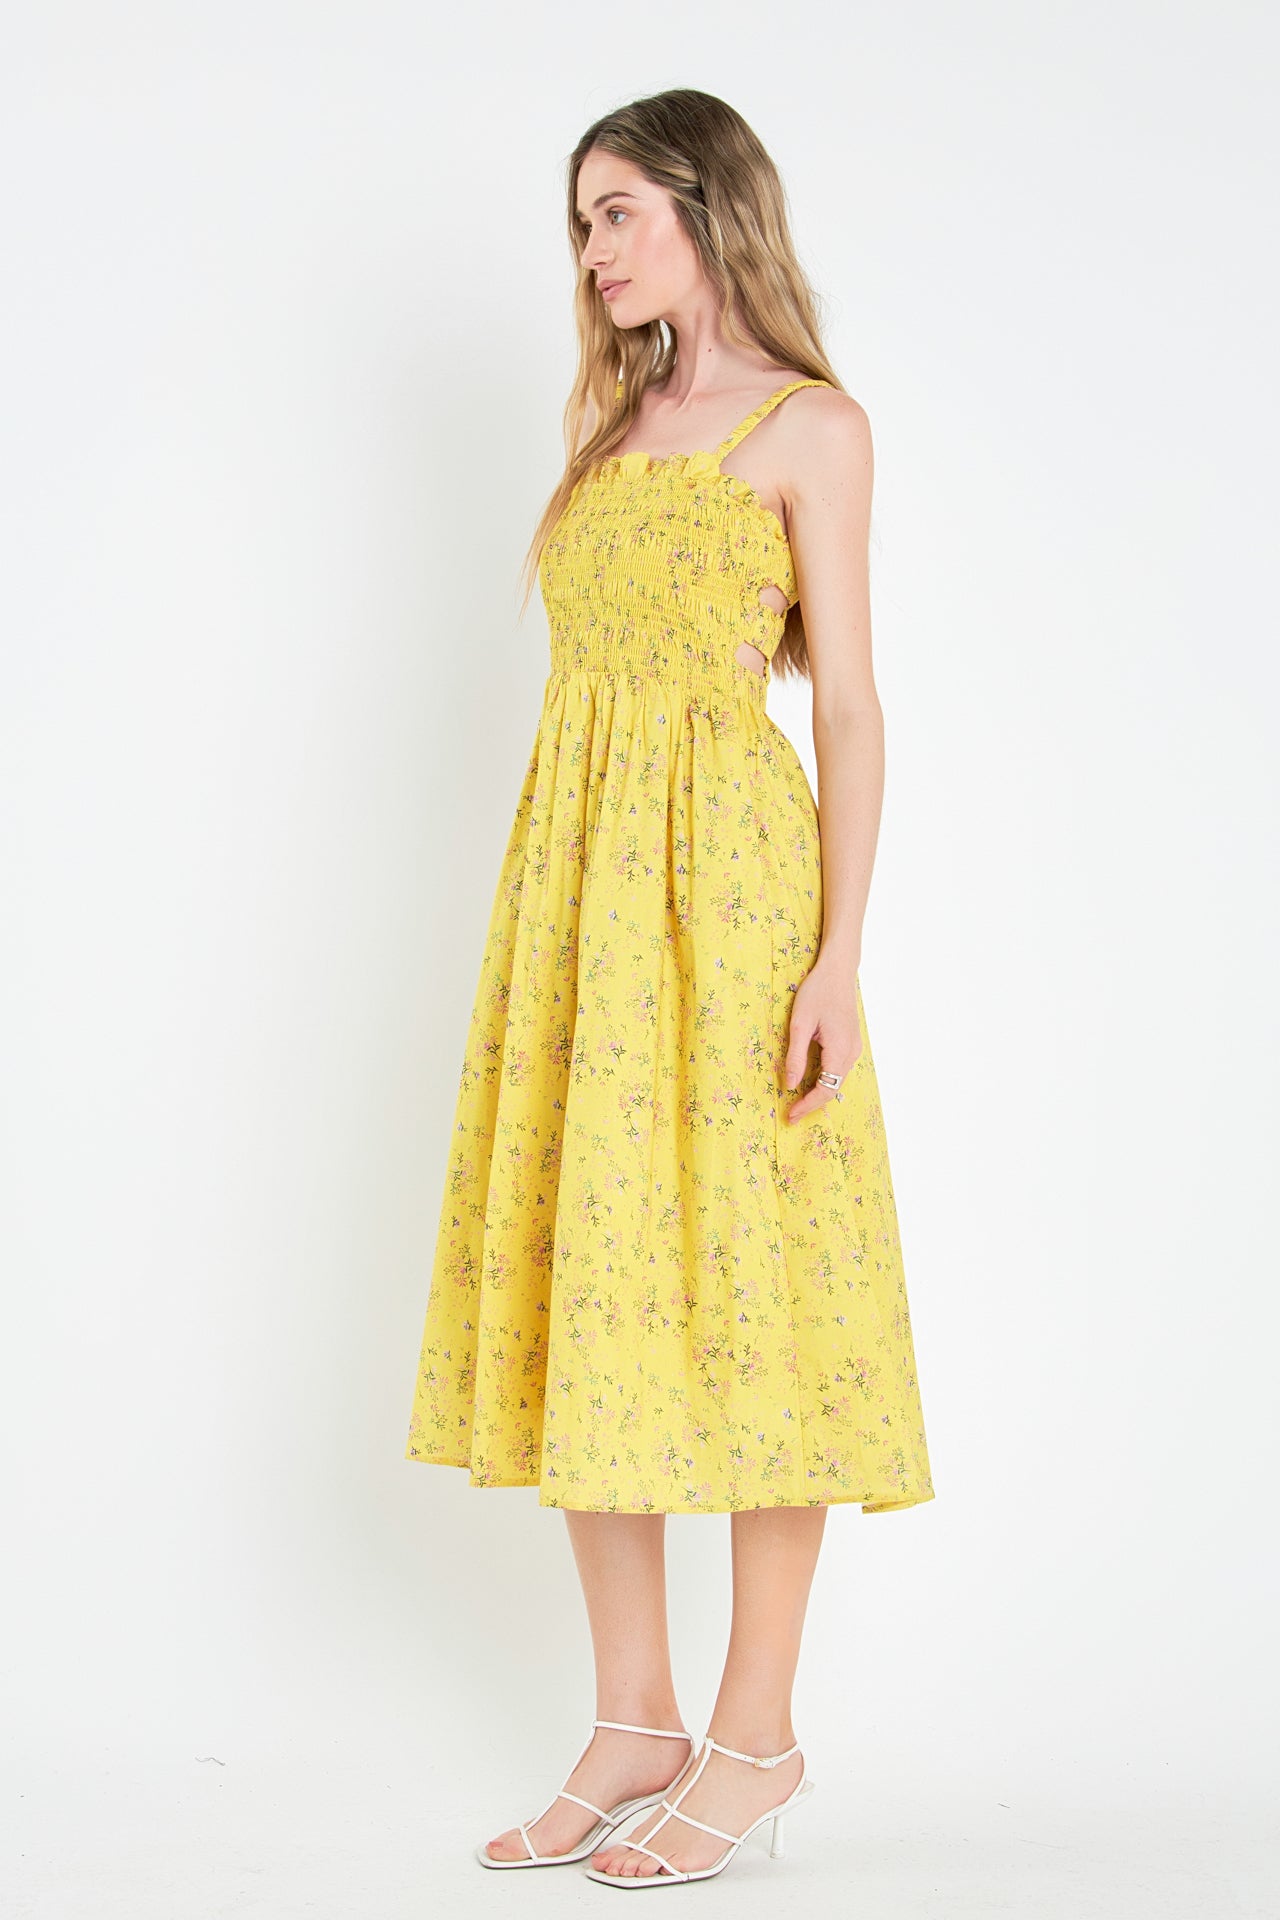 ENGLISH FACTORY - Floral Print Smocked Dress - DRESSES available at Objectrare